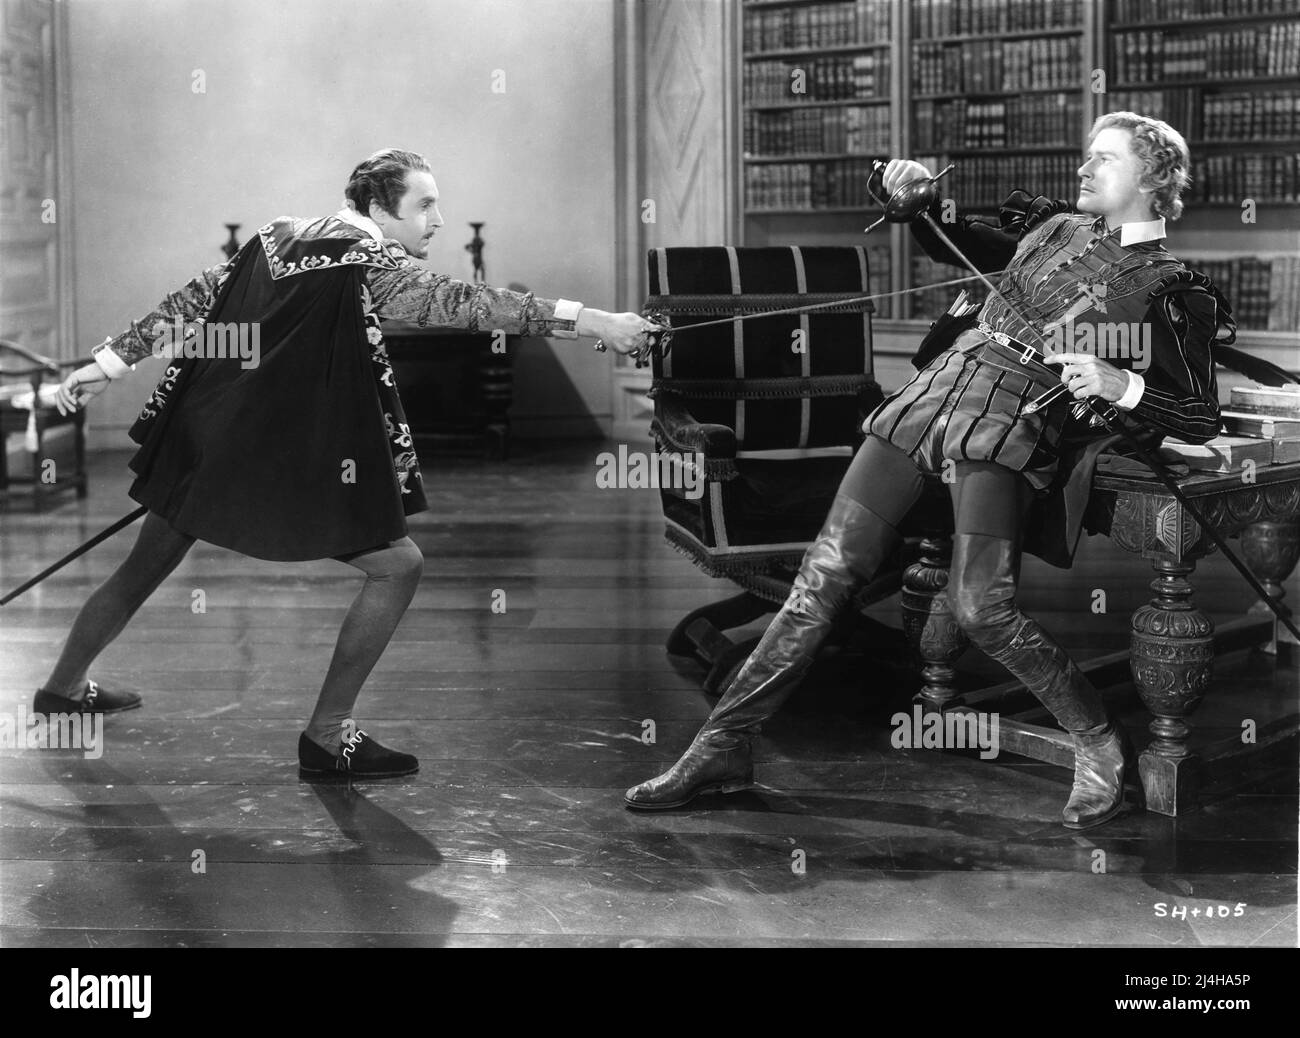 HENRY DANIELL and ERROL FLYNN in THE SEA HAWK 1940 director MICHAEL CURTIZ writers Howard Koch and Seton I. Miller costumes Orry-Kelly music Erich Wolfgang Korngold Warner Bros. Stock Photo